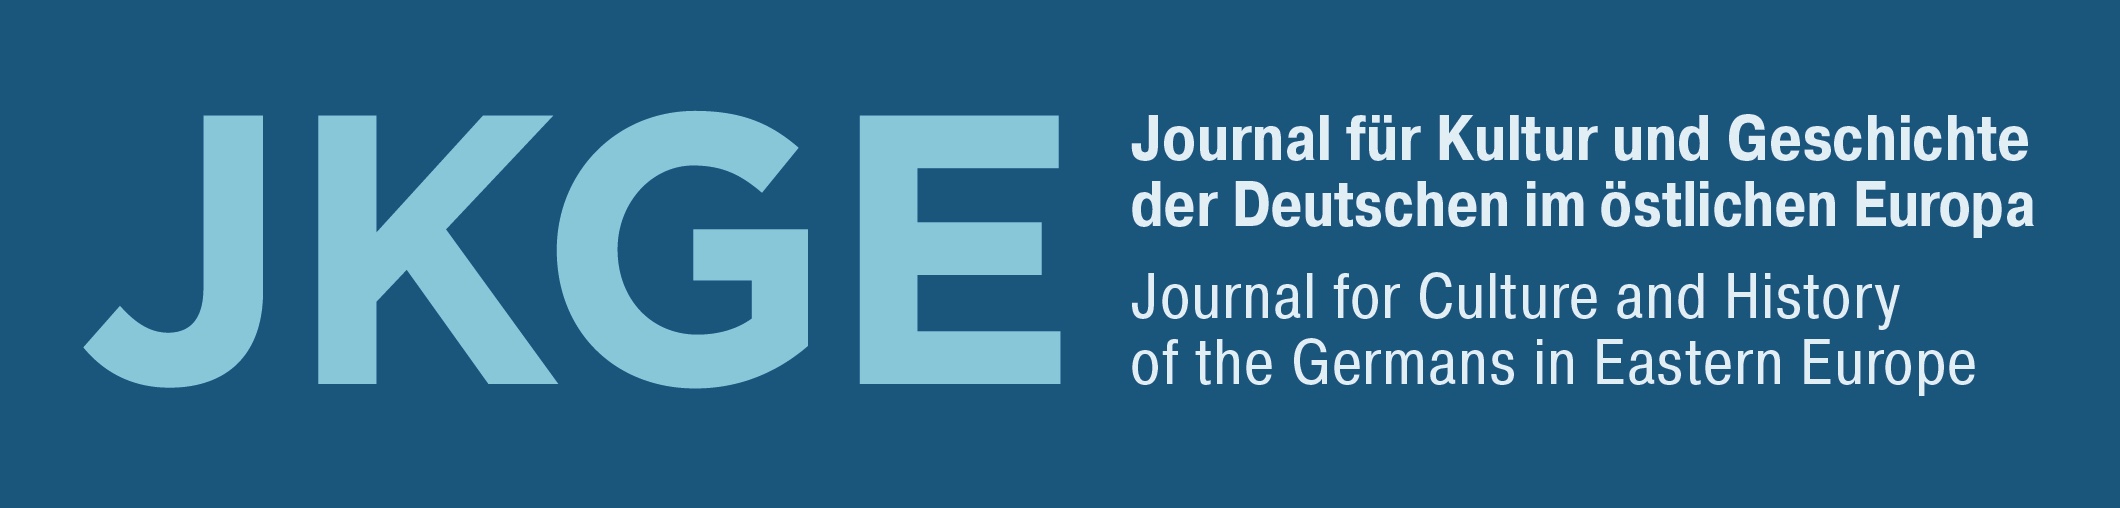 Journal for Culture and History of the Germans in Eastern Europe